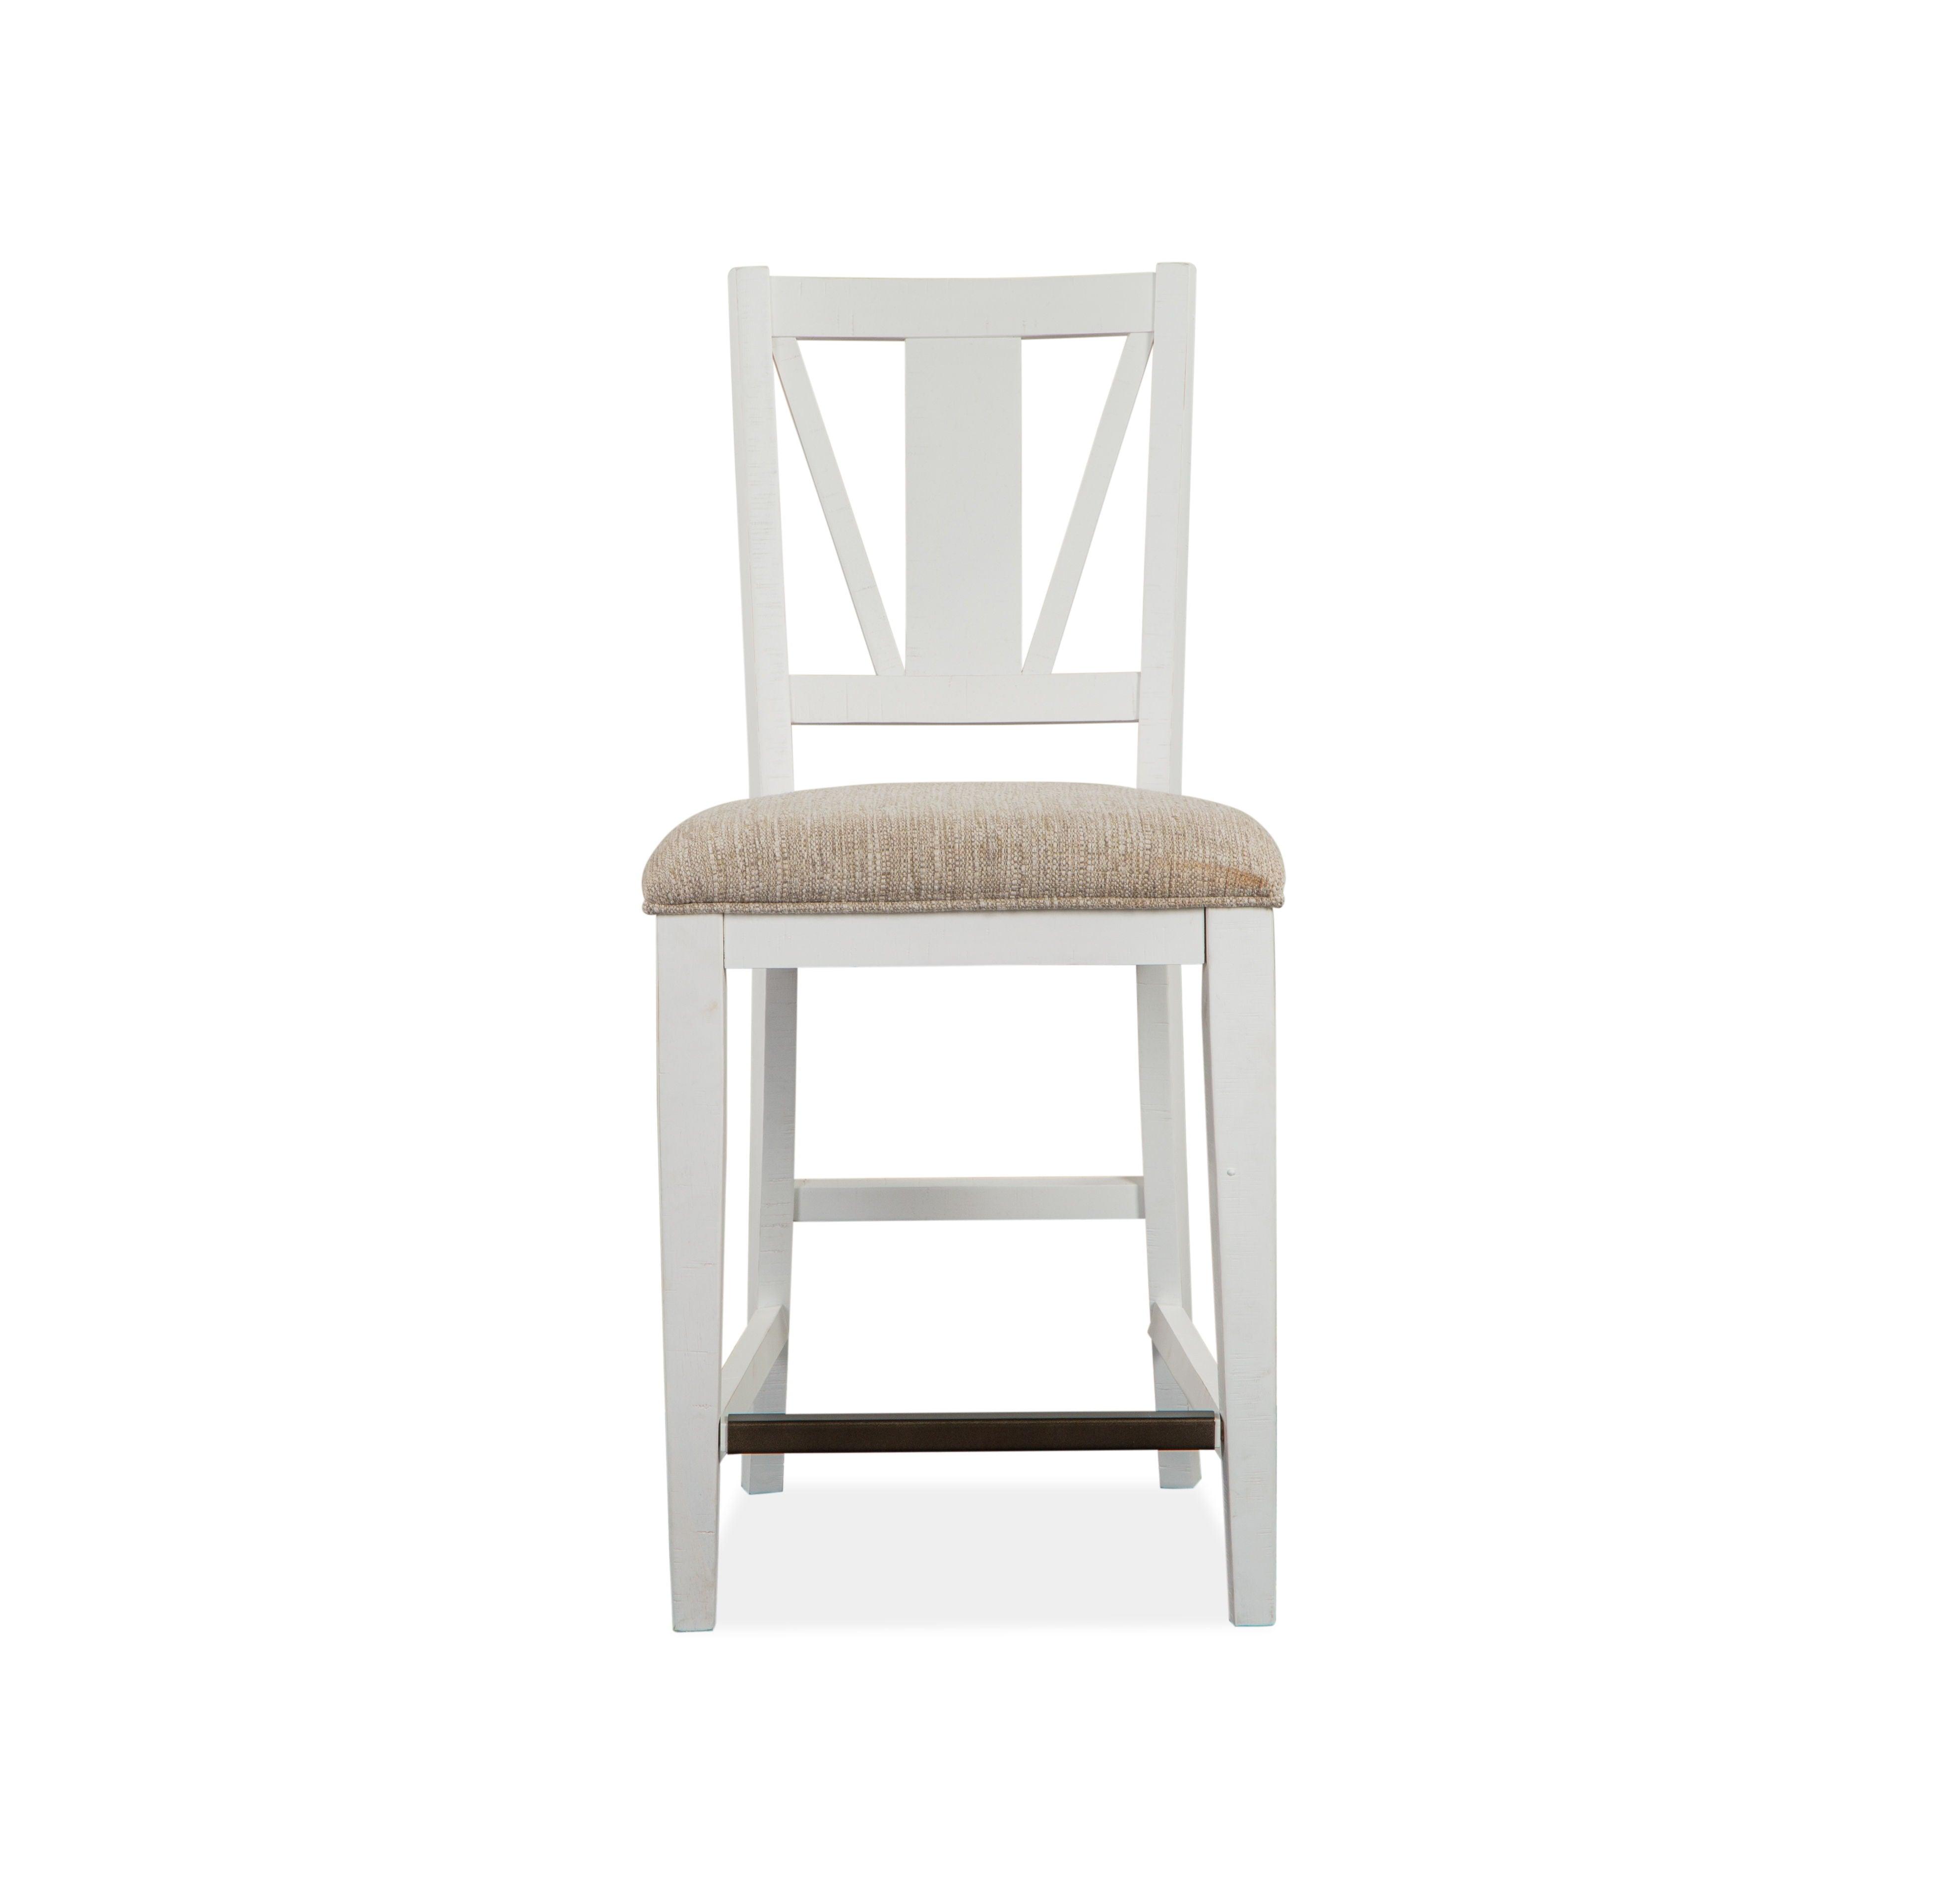 Magnussen Furniture - Heron Cove - Counter Chair With Upholstered Seat (Set of 2) - Chalk White - 5th Avenue Furniture